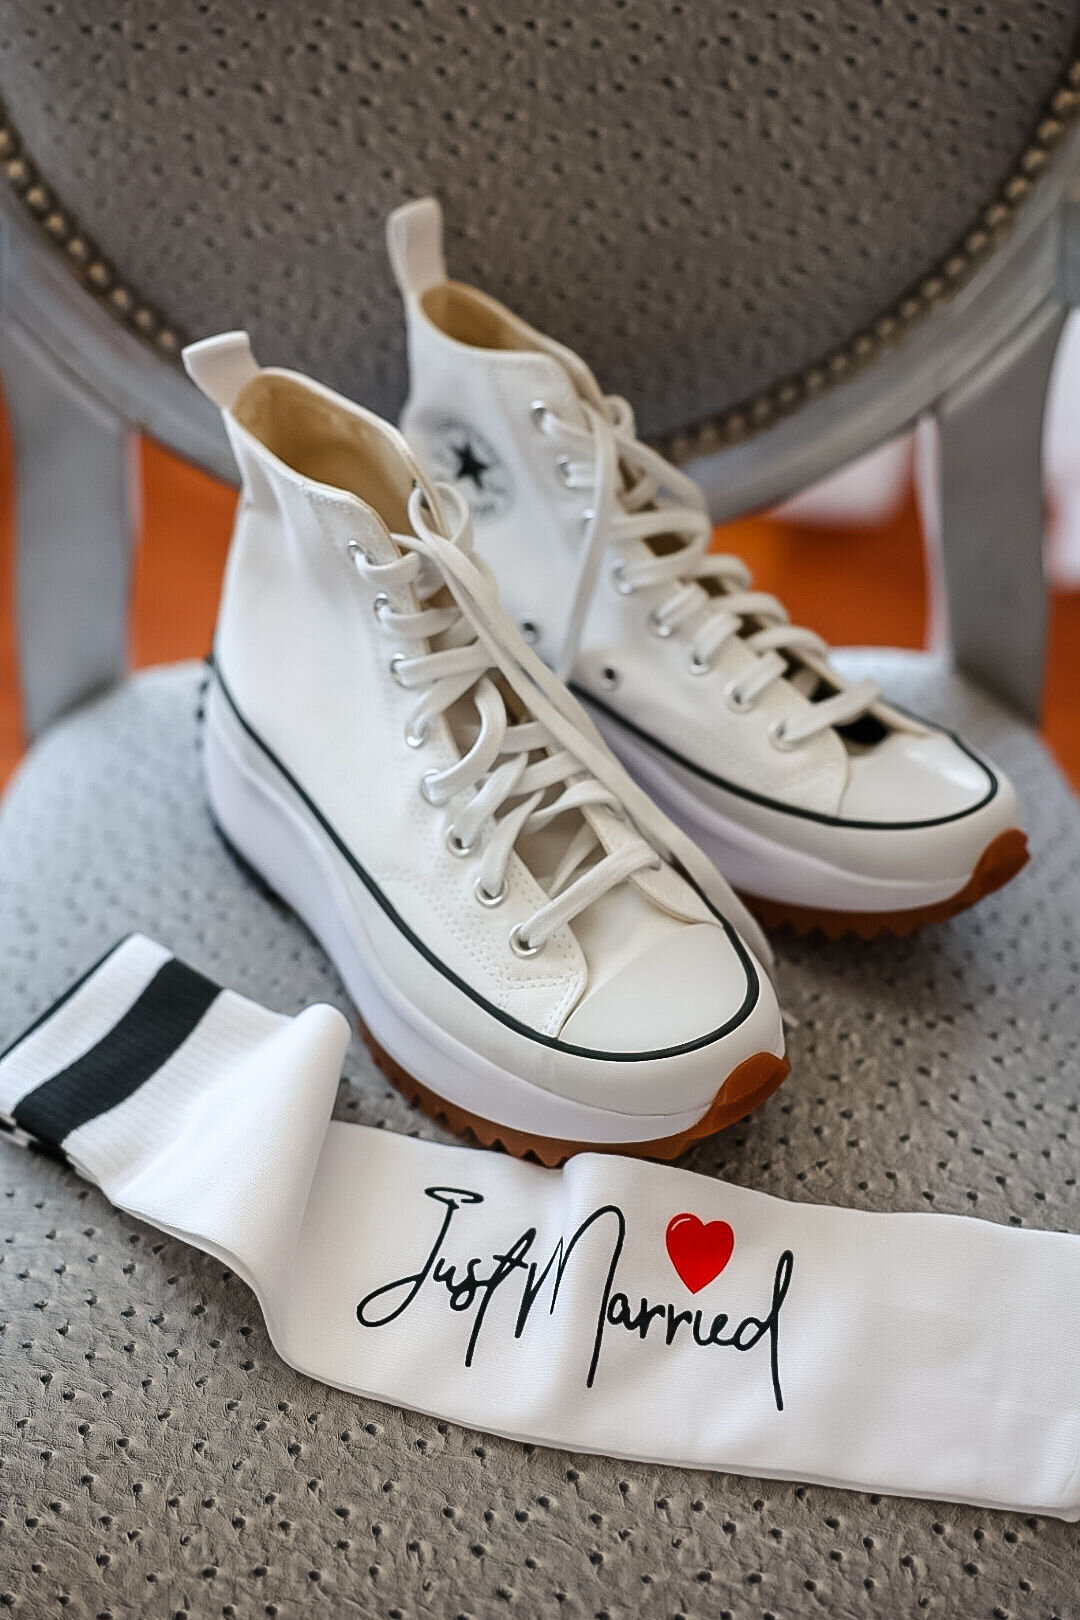 just married socks by converse high tops  on gray chair